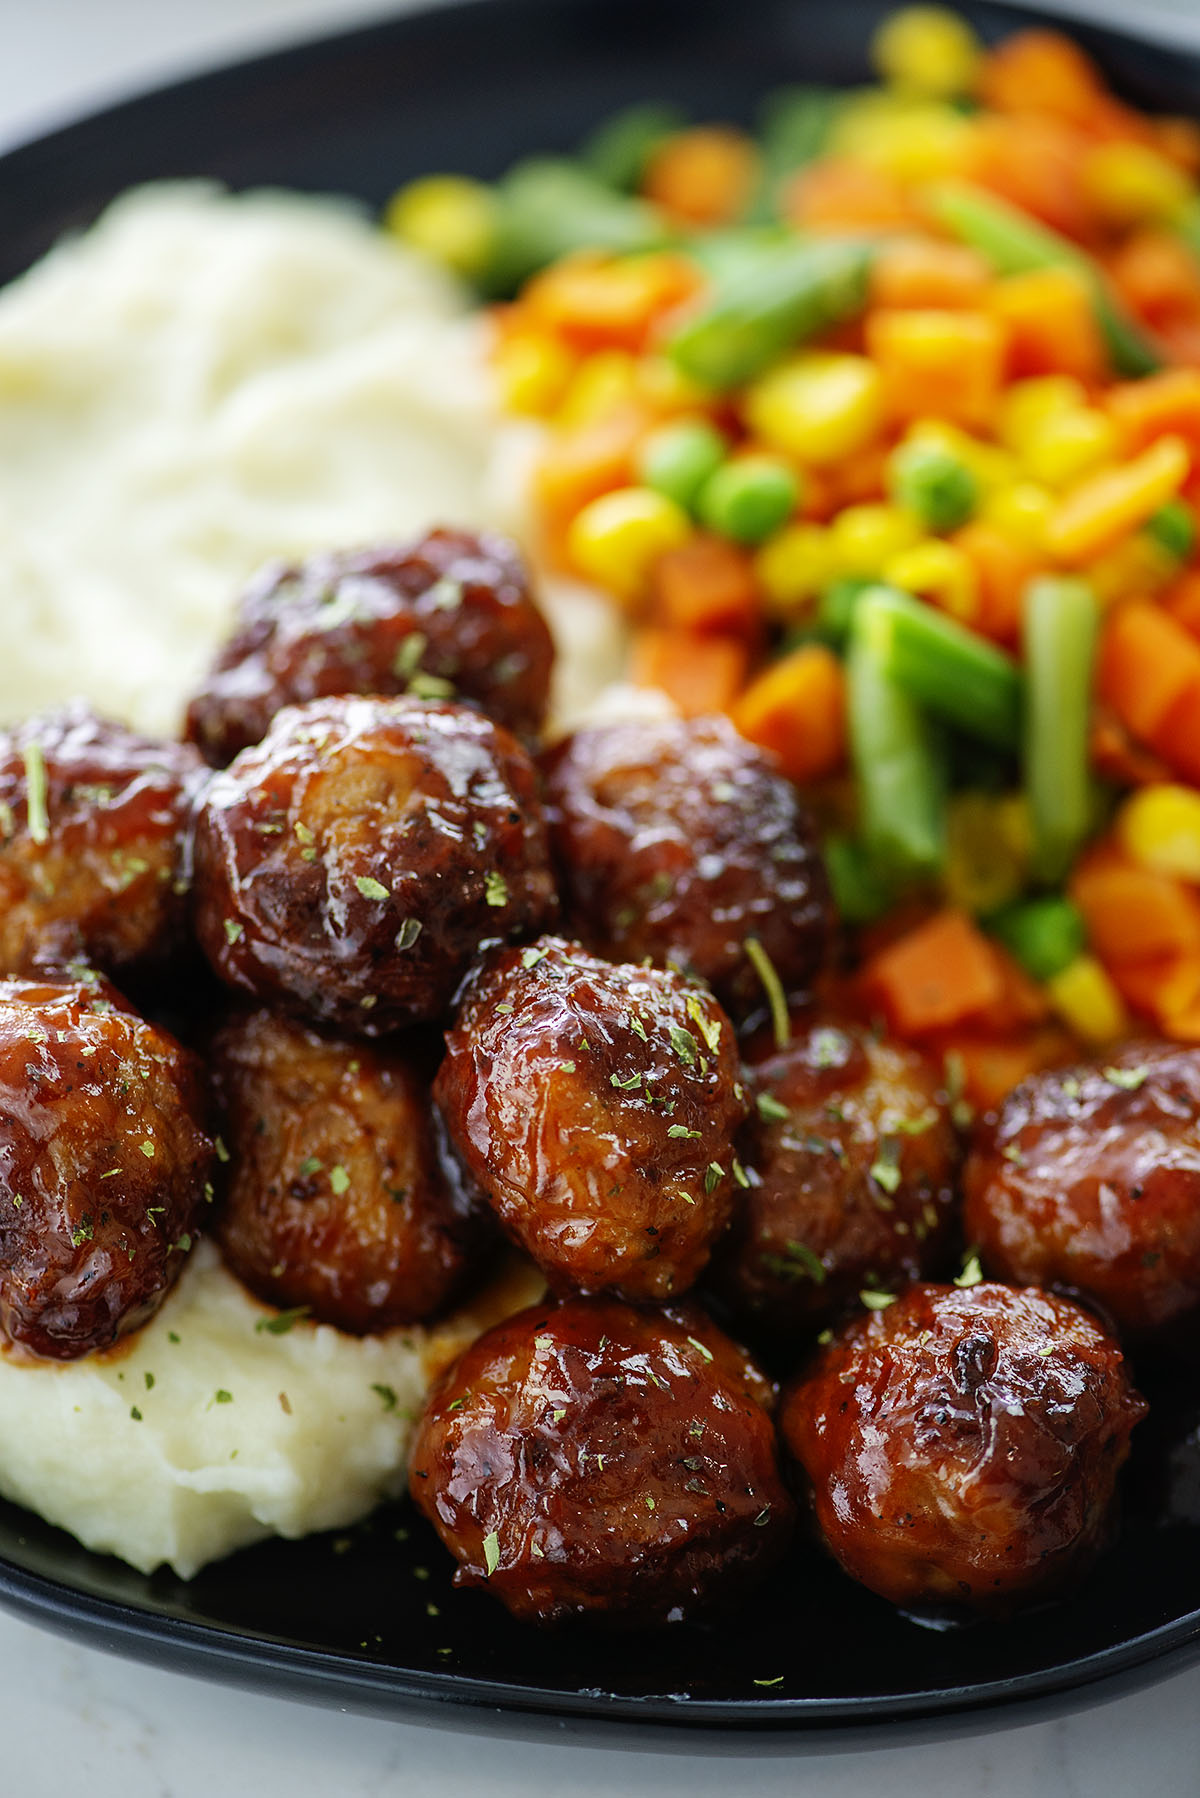 BBQ meatballs on plate with potatoes and vegetables.